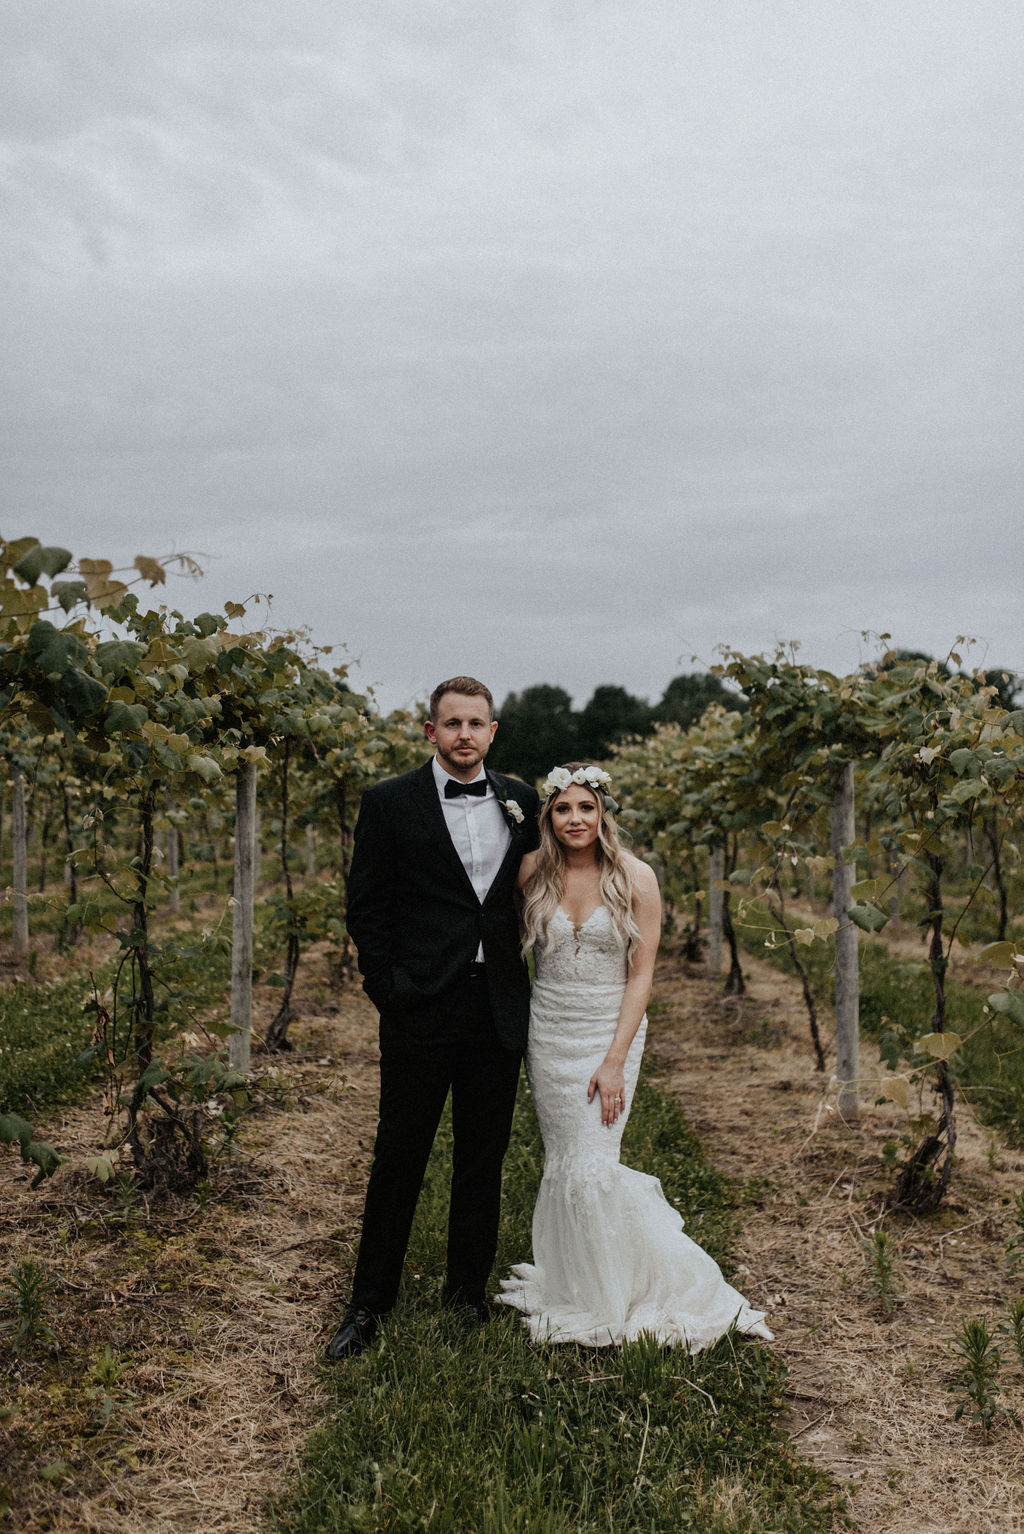 A couple smiling in the vineyards